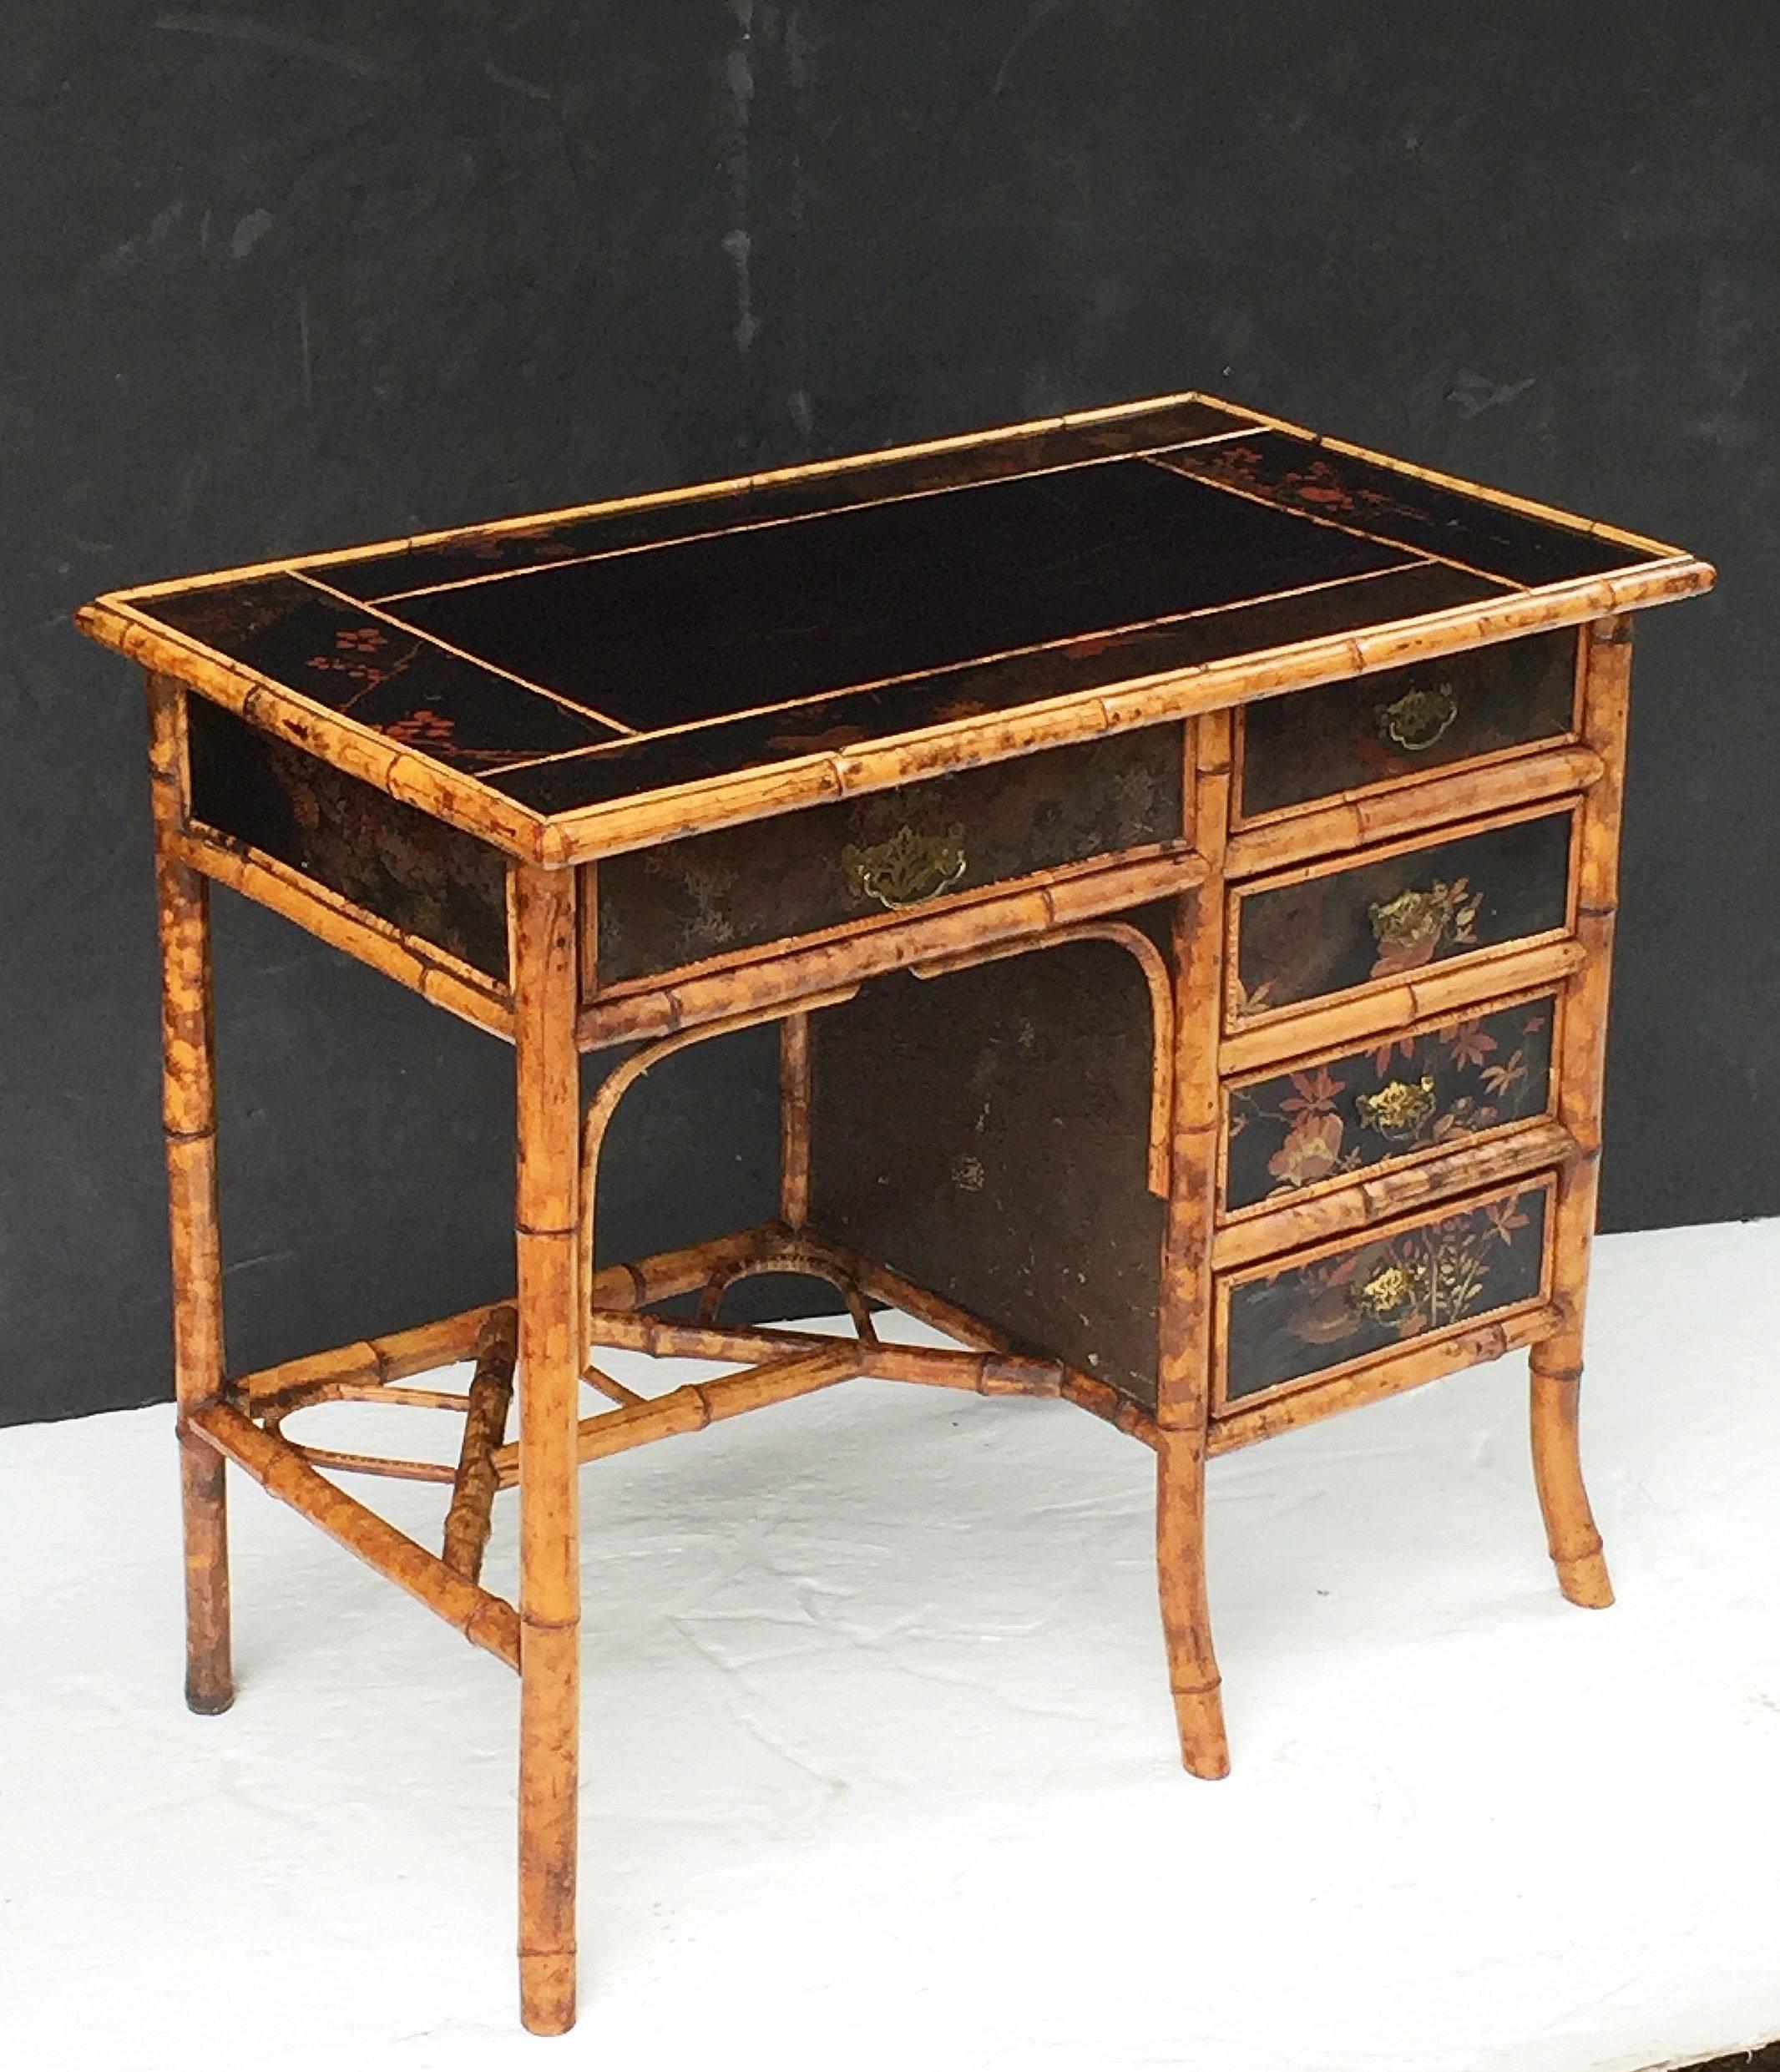 A fine English bamboo writing desk or table from the Aesthetic Movement era, circa 1870-1910, featuring a rectangular top of lacquered panels and bamboo accents surrounding a leather writing surface.
Over a frieze of five drawers and a knee-hole